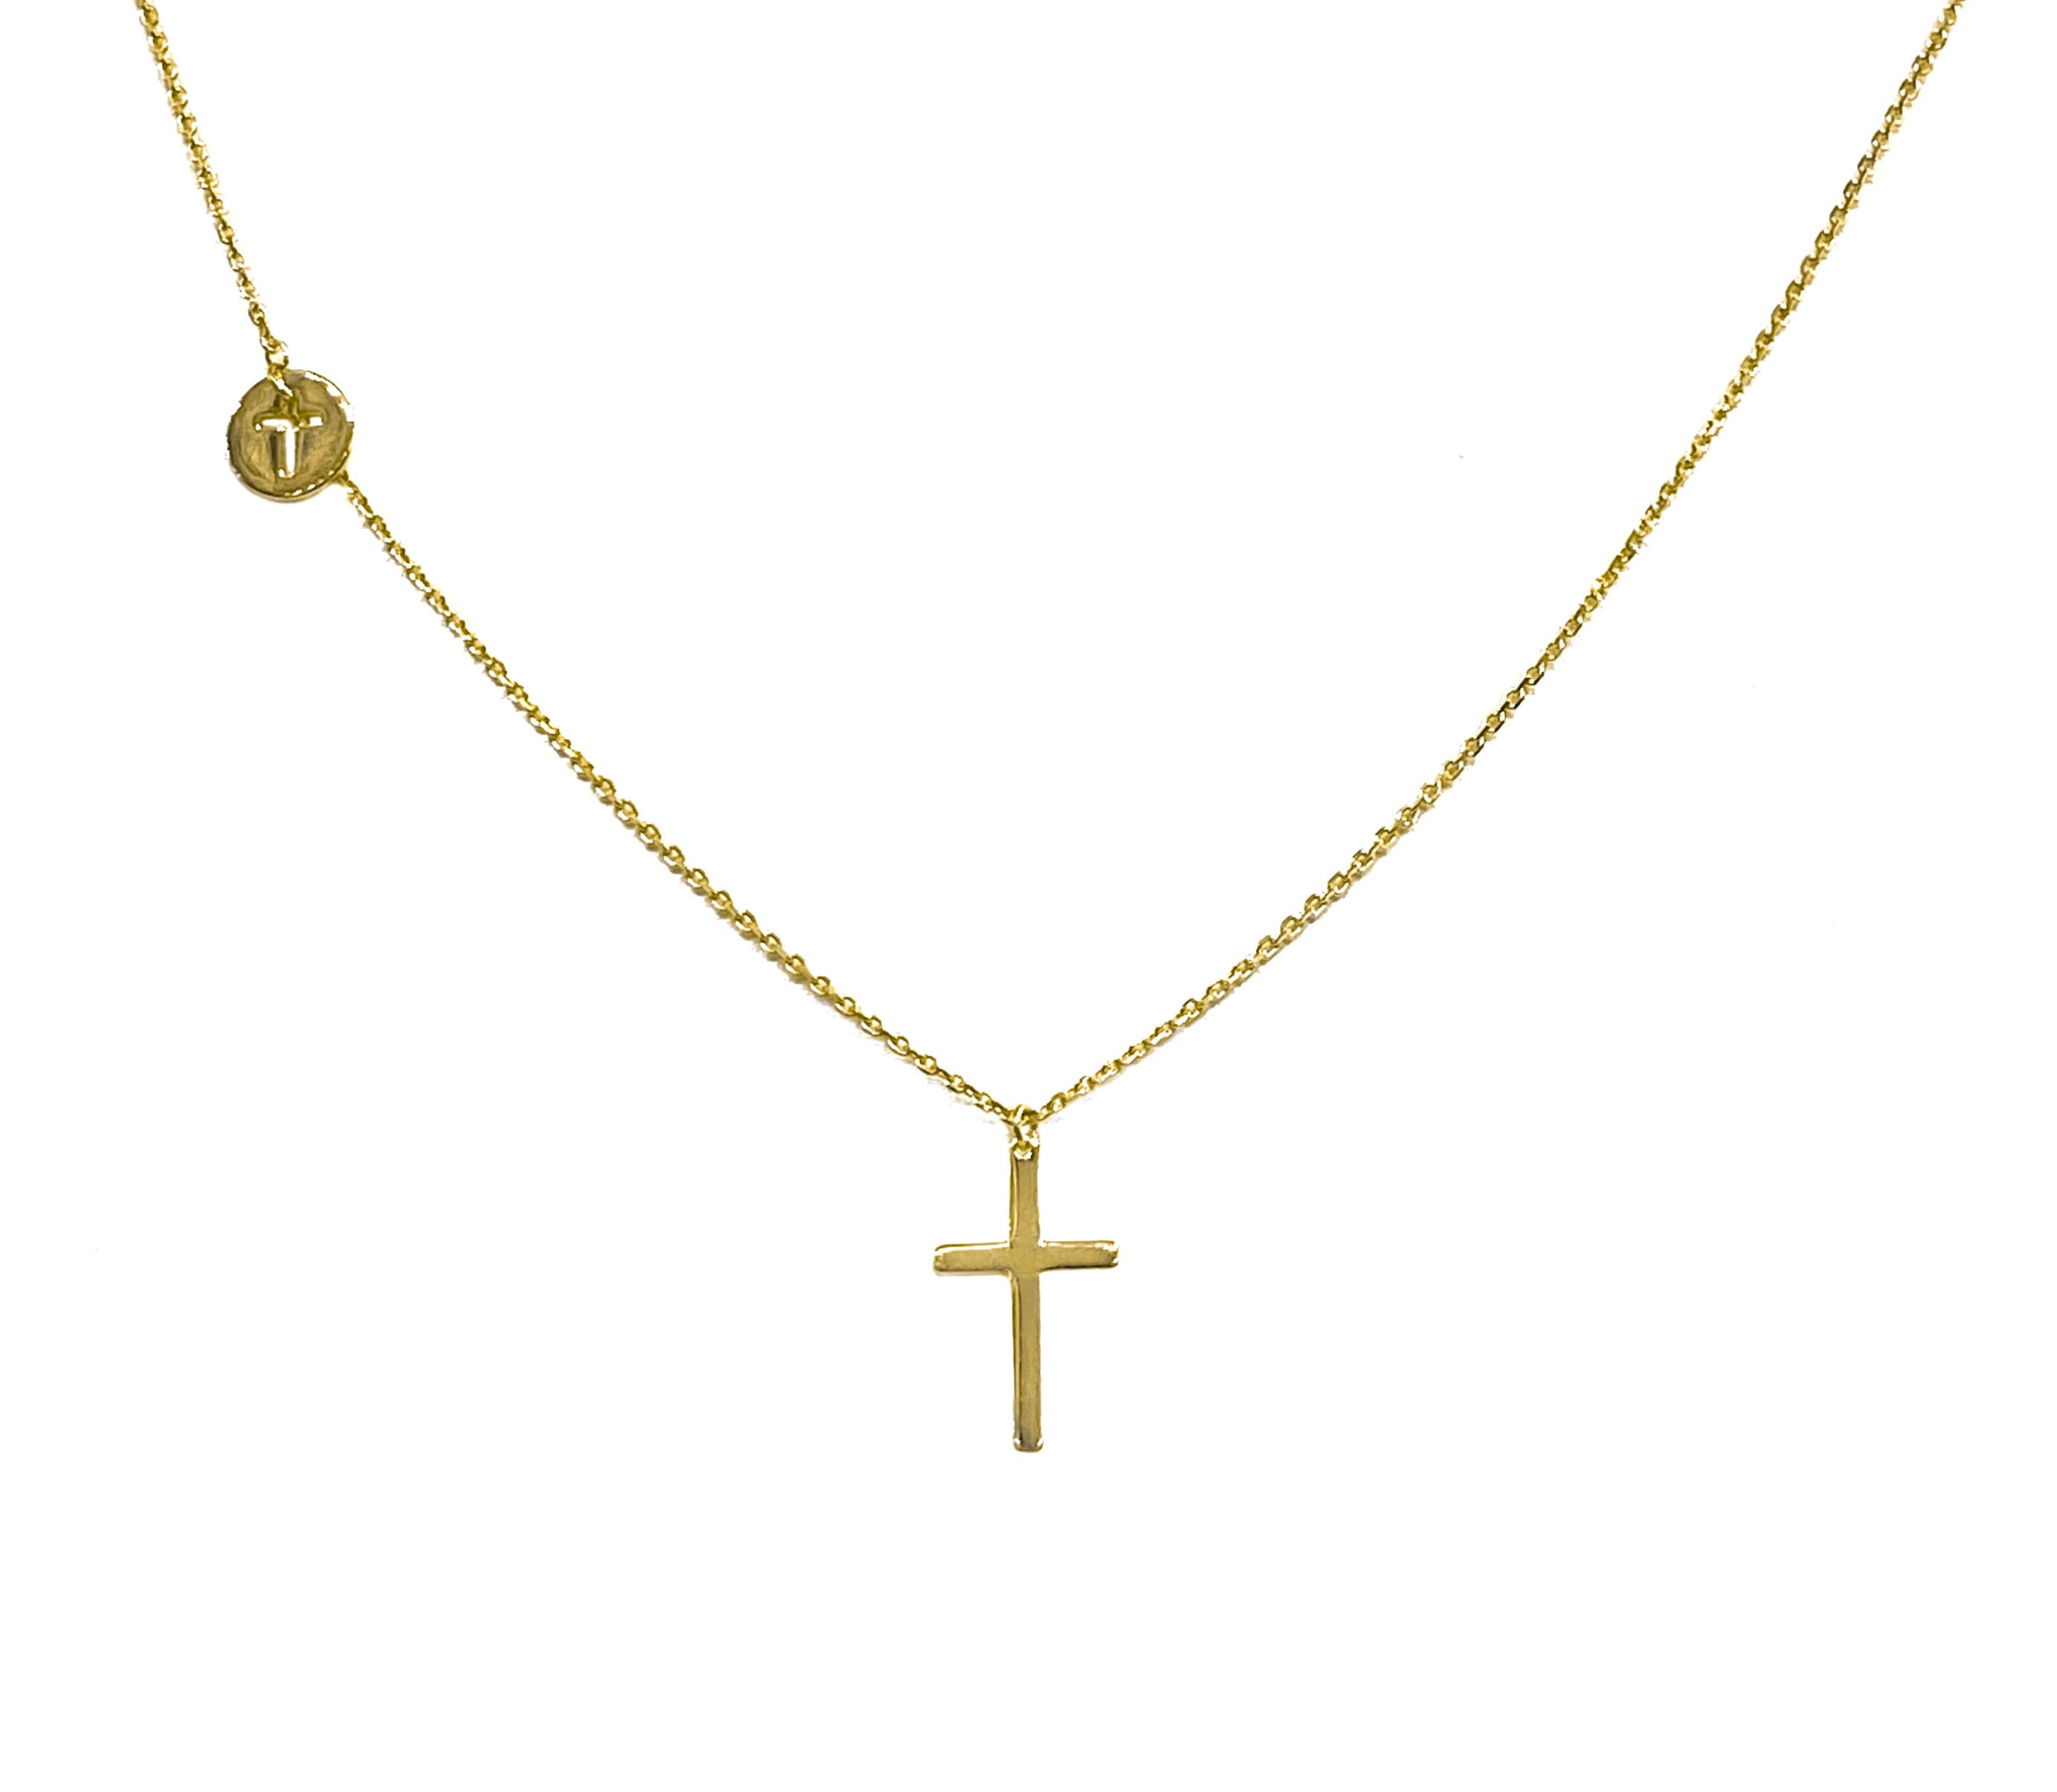 14K YELLOW GOLD LASER-CUT DISC DOUBLE CROSS NECKLACE